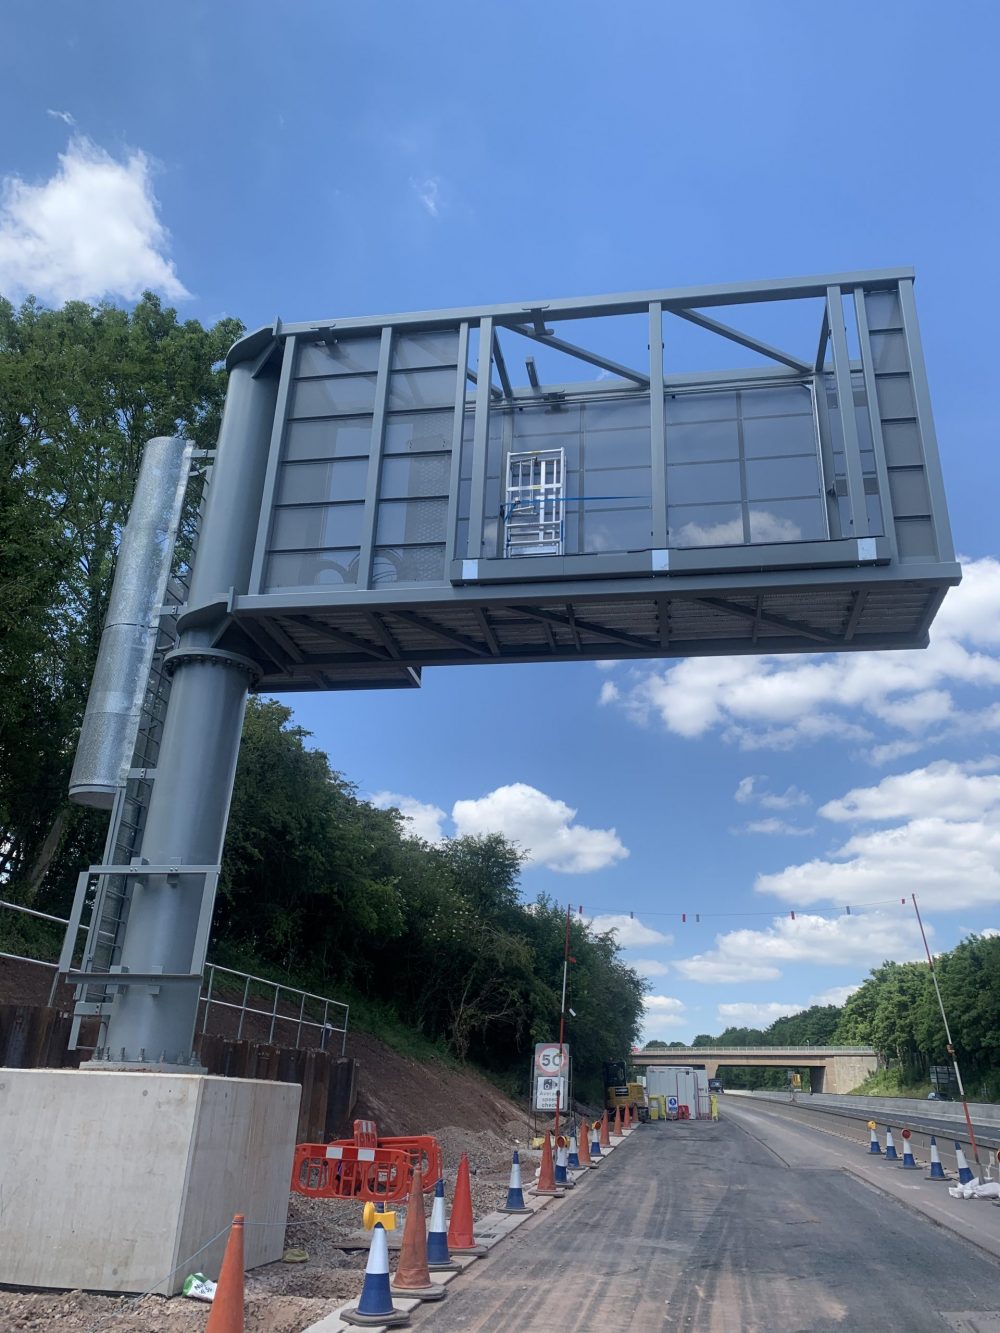 One of the gantries now in place on the M6 near Stafford which will house up-to-date technology.